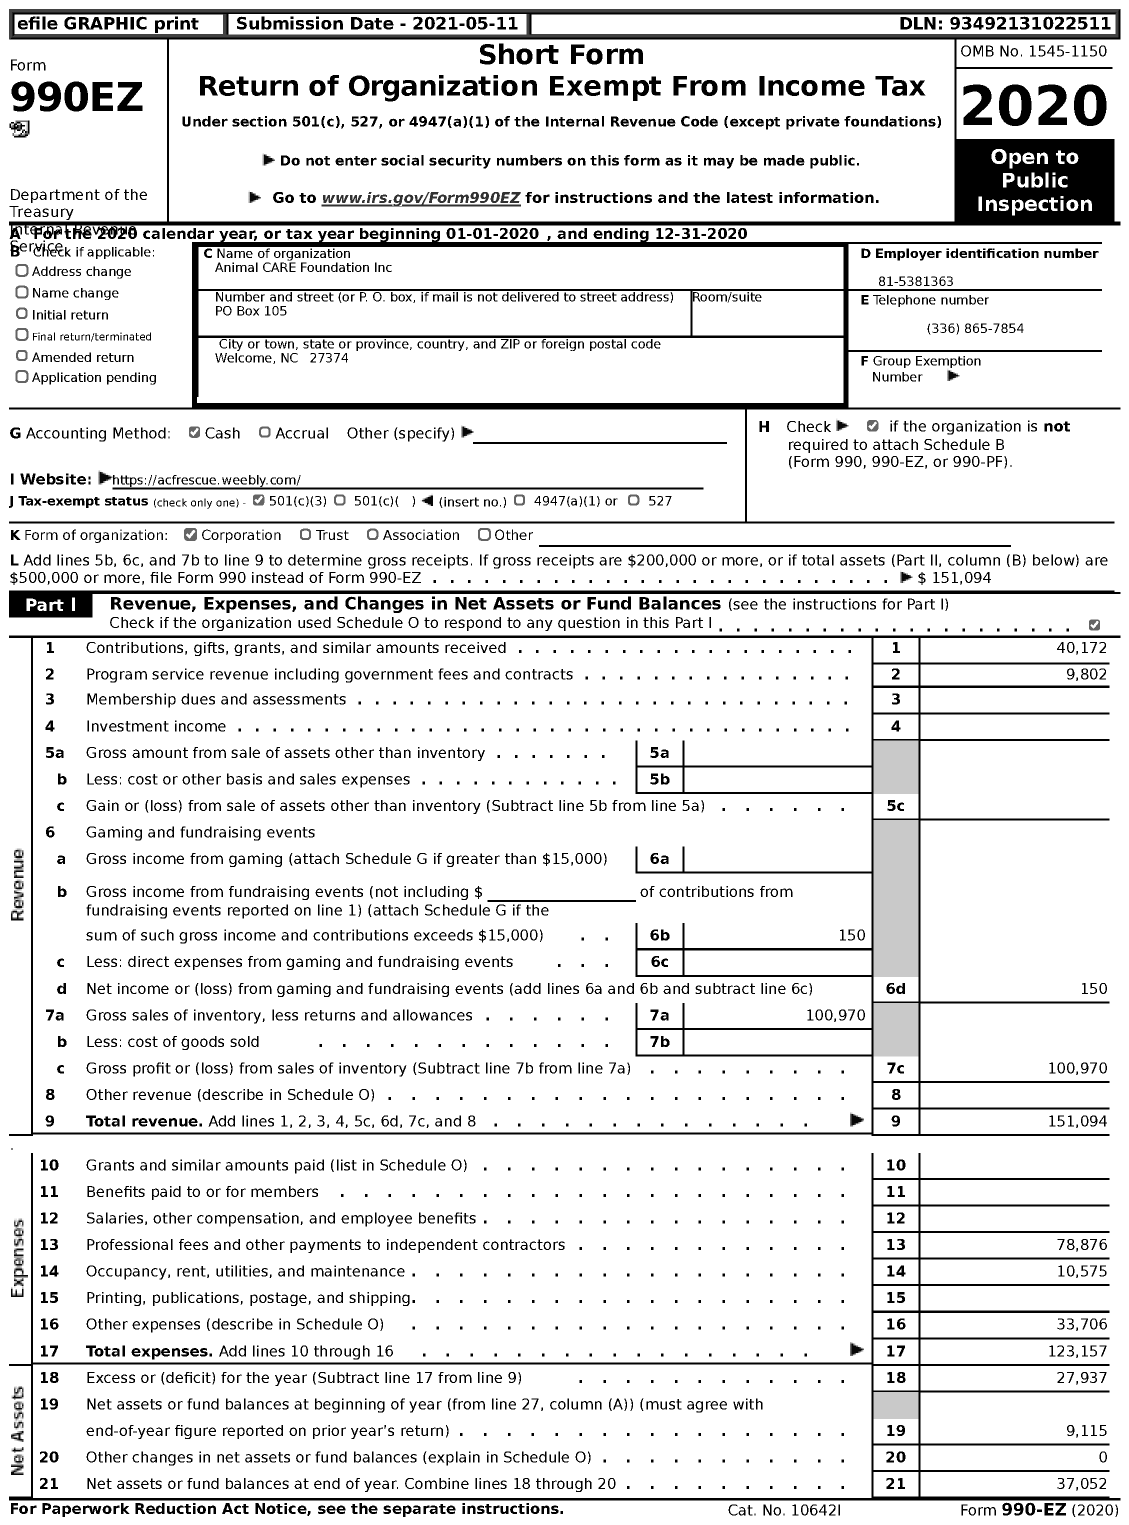 Image of first page of 2020 Form 990EZ for Animal CARE Foundation